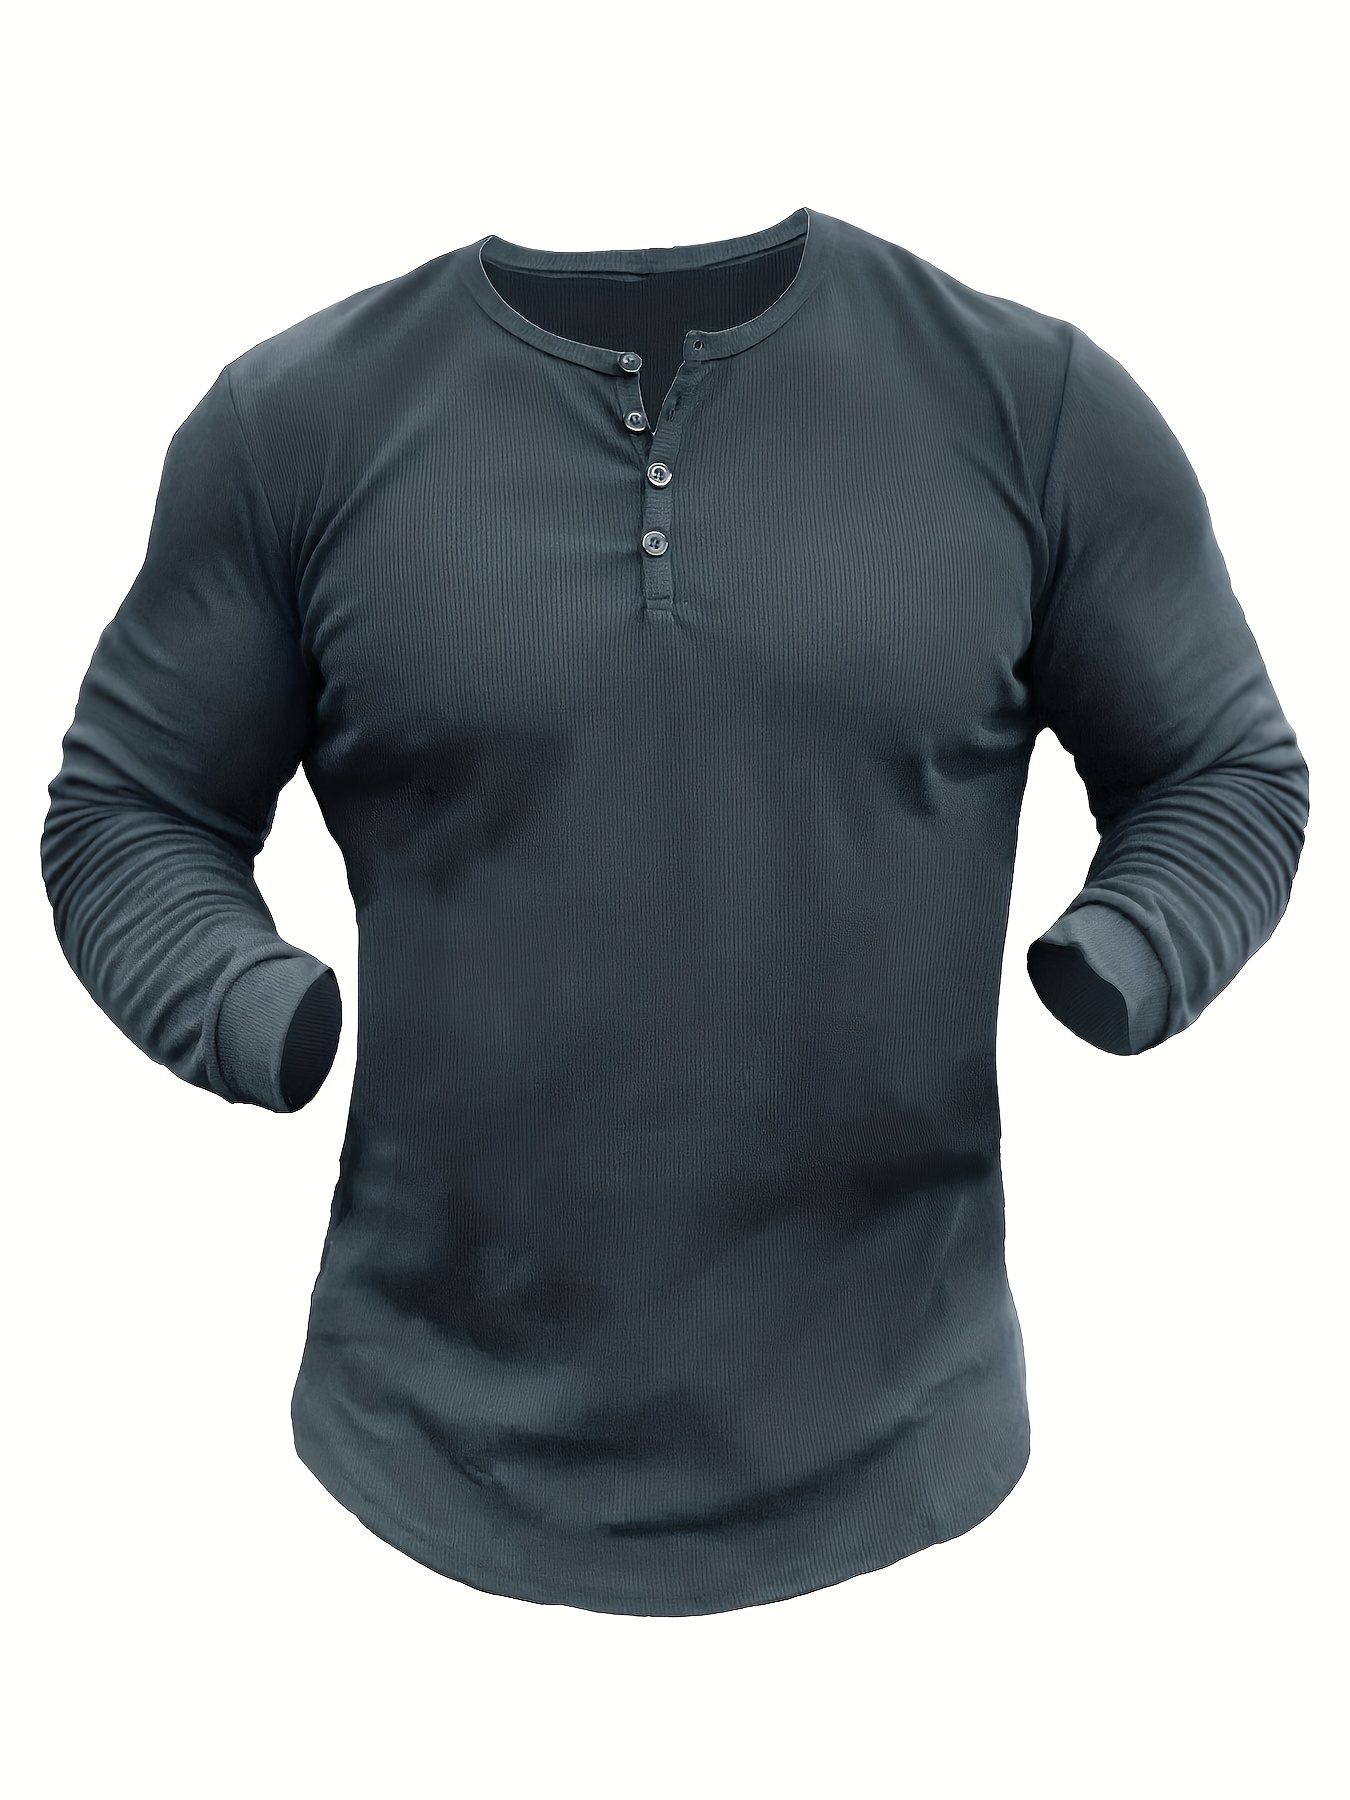 Men's Long Sleeve Shirt Base Layer Collection (Waffle Knit